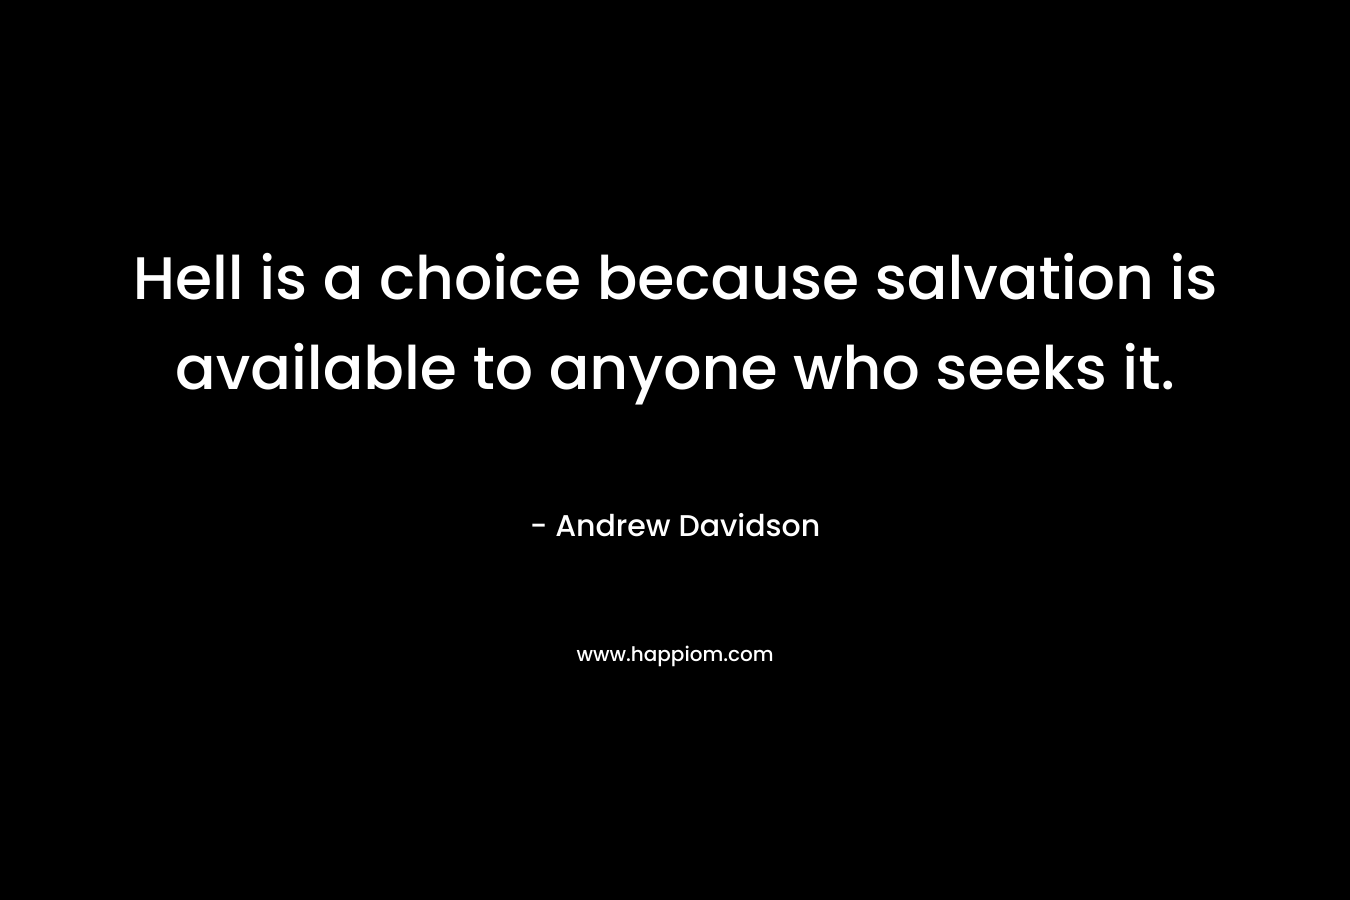 Hell is a choice because salvation is available to anyone who seeks it.